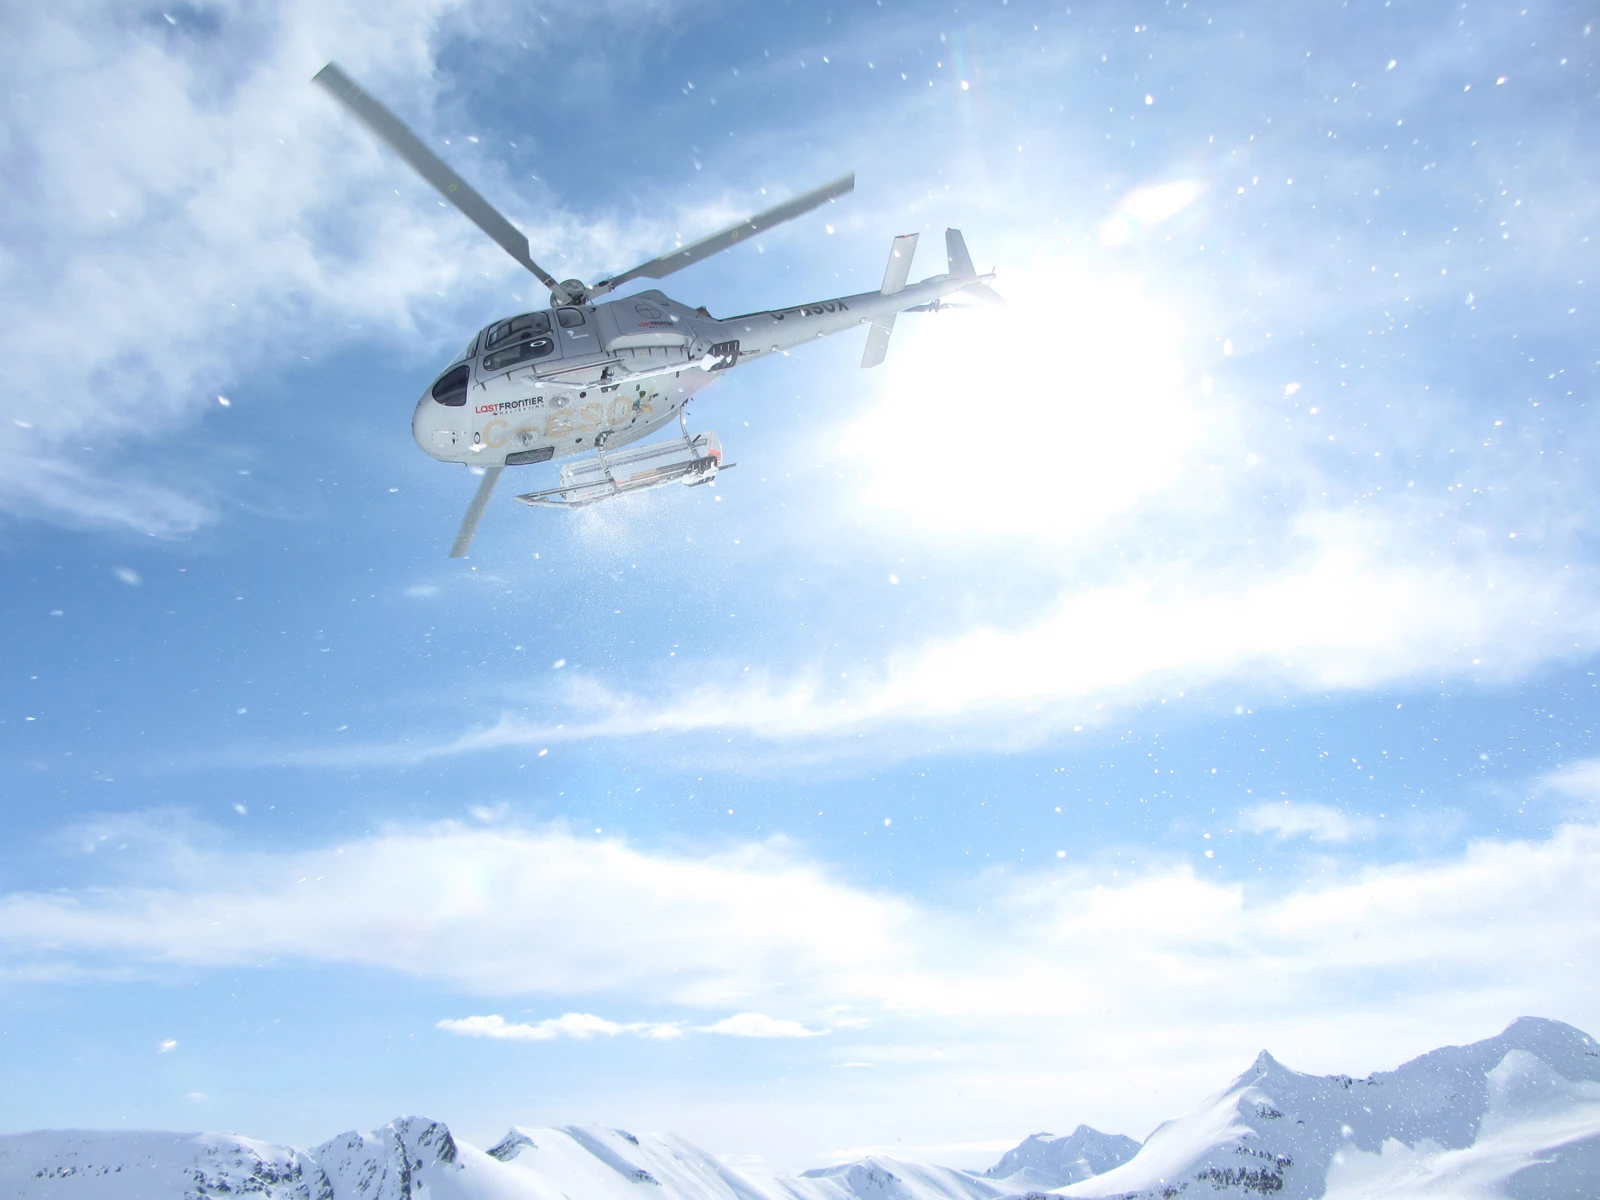 A helicopter flying overhead in snowy conditions on a sunny day